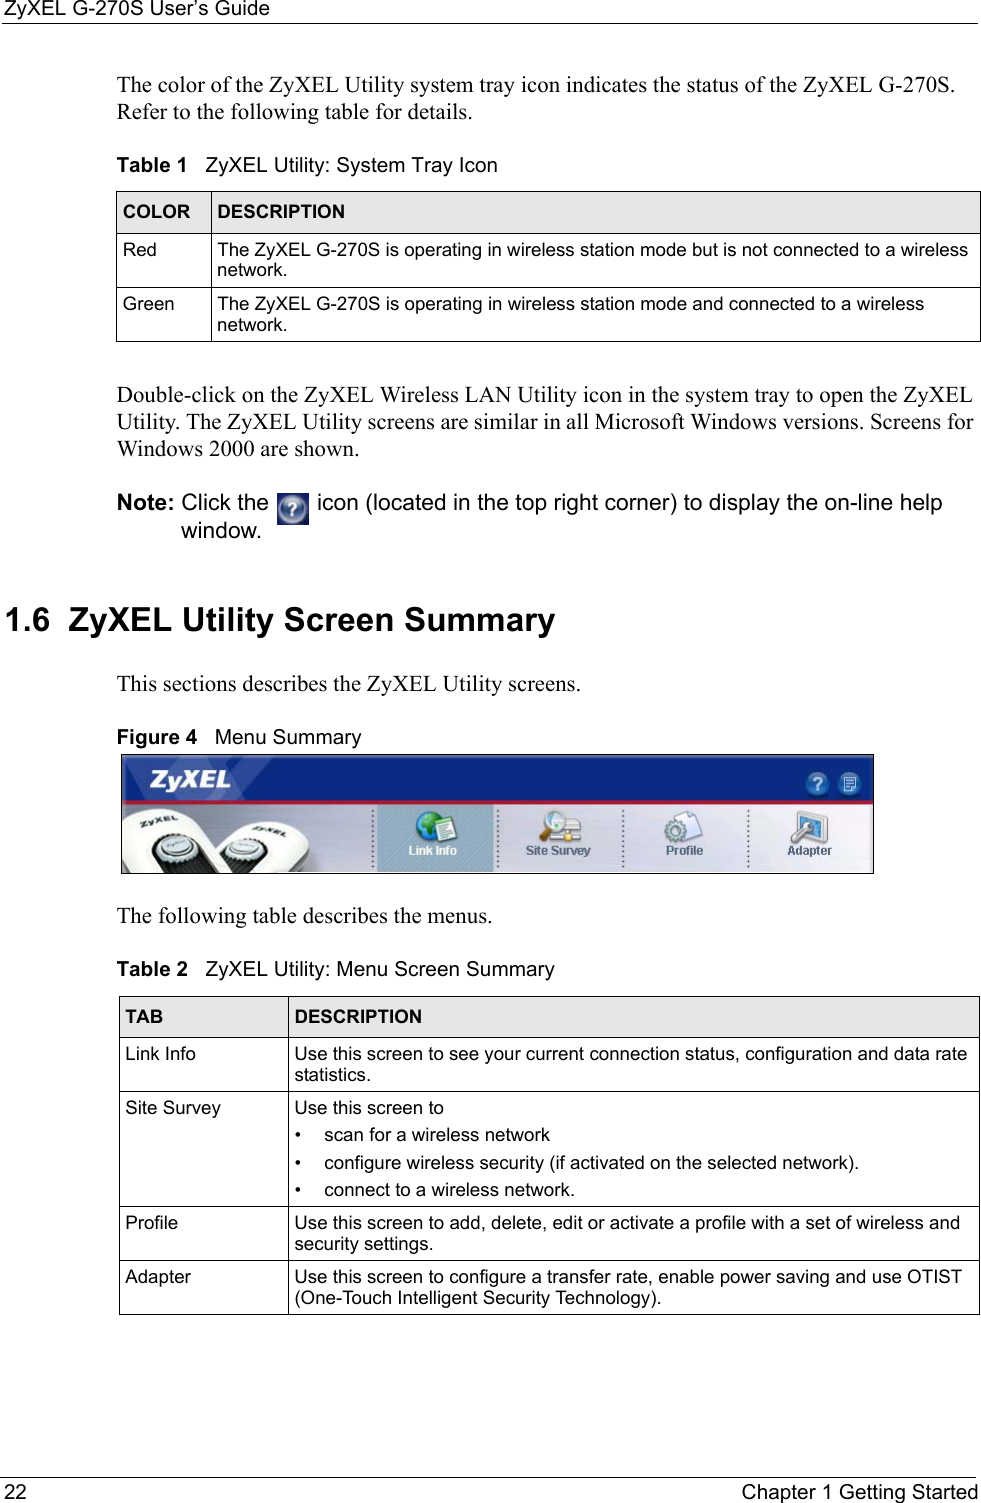 ZyXEL G-270S User’s Guide22 Chapter 1 Getting StartedThe color of the ZyXEL Utility system tray icon indicates the status of the ZyXEL G-270S. Refer to the following table for details. Double-click on the ZyXEL Wireless LAN Utility icon in the system tray to open the ZyXEL Utility. The ZyXEL Utility screens are similar in all Microsoft Windows versions. Screens for Windows 2000 are shown. Note: Click the   icon (located in the top right corner) to display the on-line help window.1.6  ZyXEL Utility Screen Summary This sections describes the ZyXEL Utility screens. Figure 4   Menu Summary The following table describes the menus. Table 1   ZyXEL Utility: System Tray Icon COLOR DESCRIPTIONRed The ZyXEL G-270S is operating in wireless station mode but is not connected to a wireless network.Green The ZyXEL G-270S is operating in wireless station mode and connected to a wireless network.Table 2   ZyXEL Utility: Menu Screen SummaryTAB DESCRIPTIONLink Info Use this screen to see your current connection status, configuration and data rate statistics.Site Survey Use this screen to • scan for a wireless network• configure wireless security (if activated on the selected network).• connect to a wireless network.Profile Use this screen to add, delete, edit or activate a profile with a set of wireless and security settings.Adapter Use this screen to configure a transfer rate, enable power saving and use OTIST (One-Touch Intelligent Security Technology).